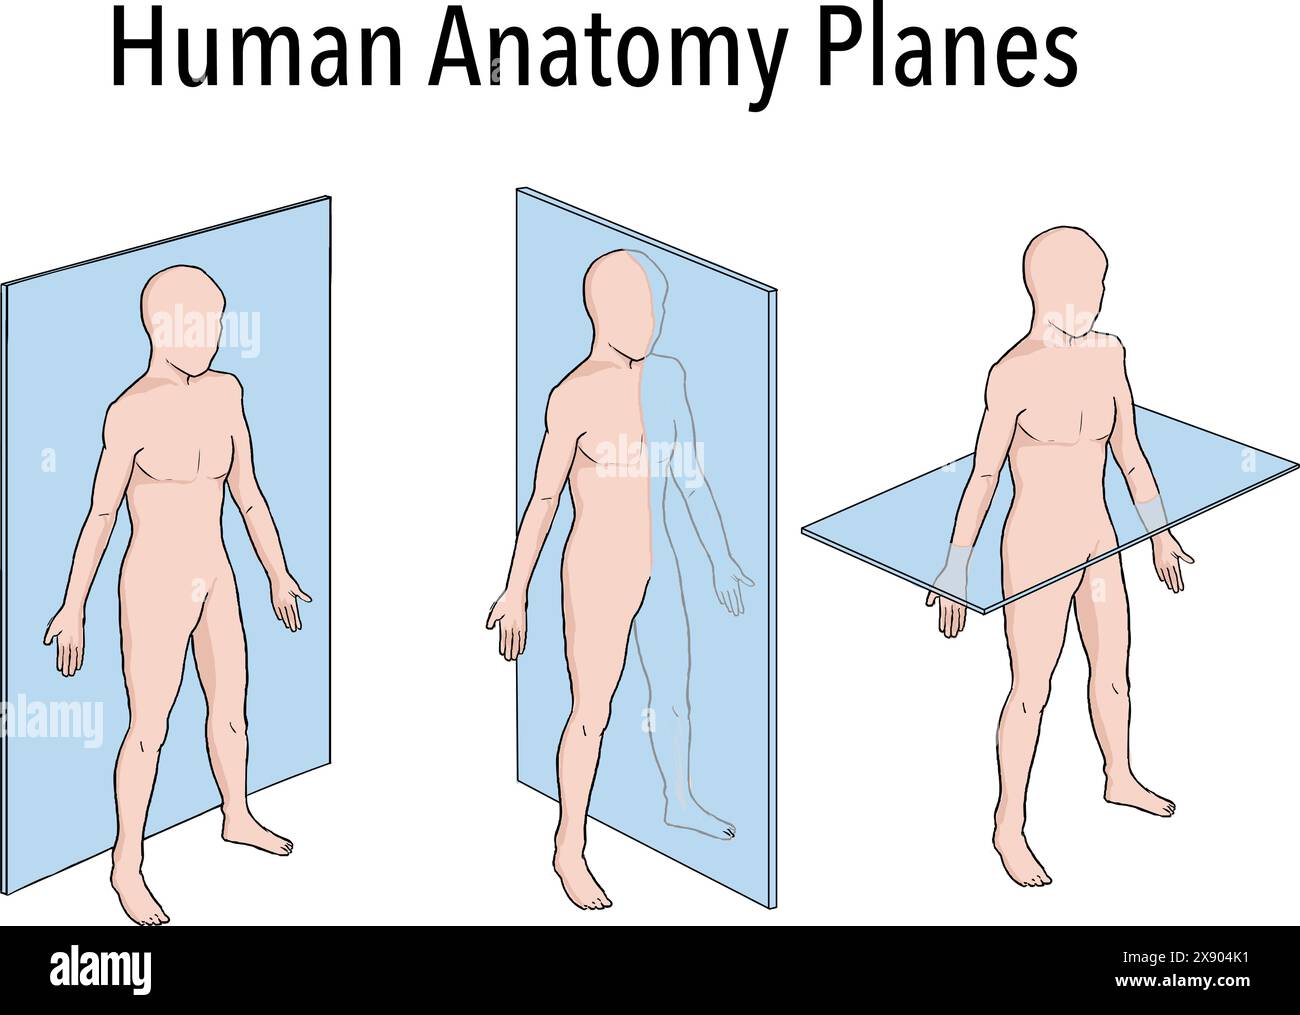 Anatomical planes of section, showing sagittal, coronal and transverse planes through a male body. Created in Adobe Illustrator. Contains transparent Stock Vector